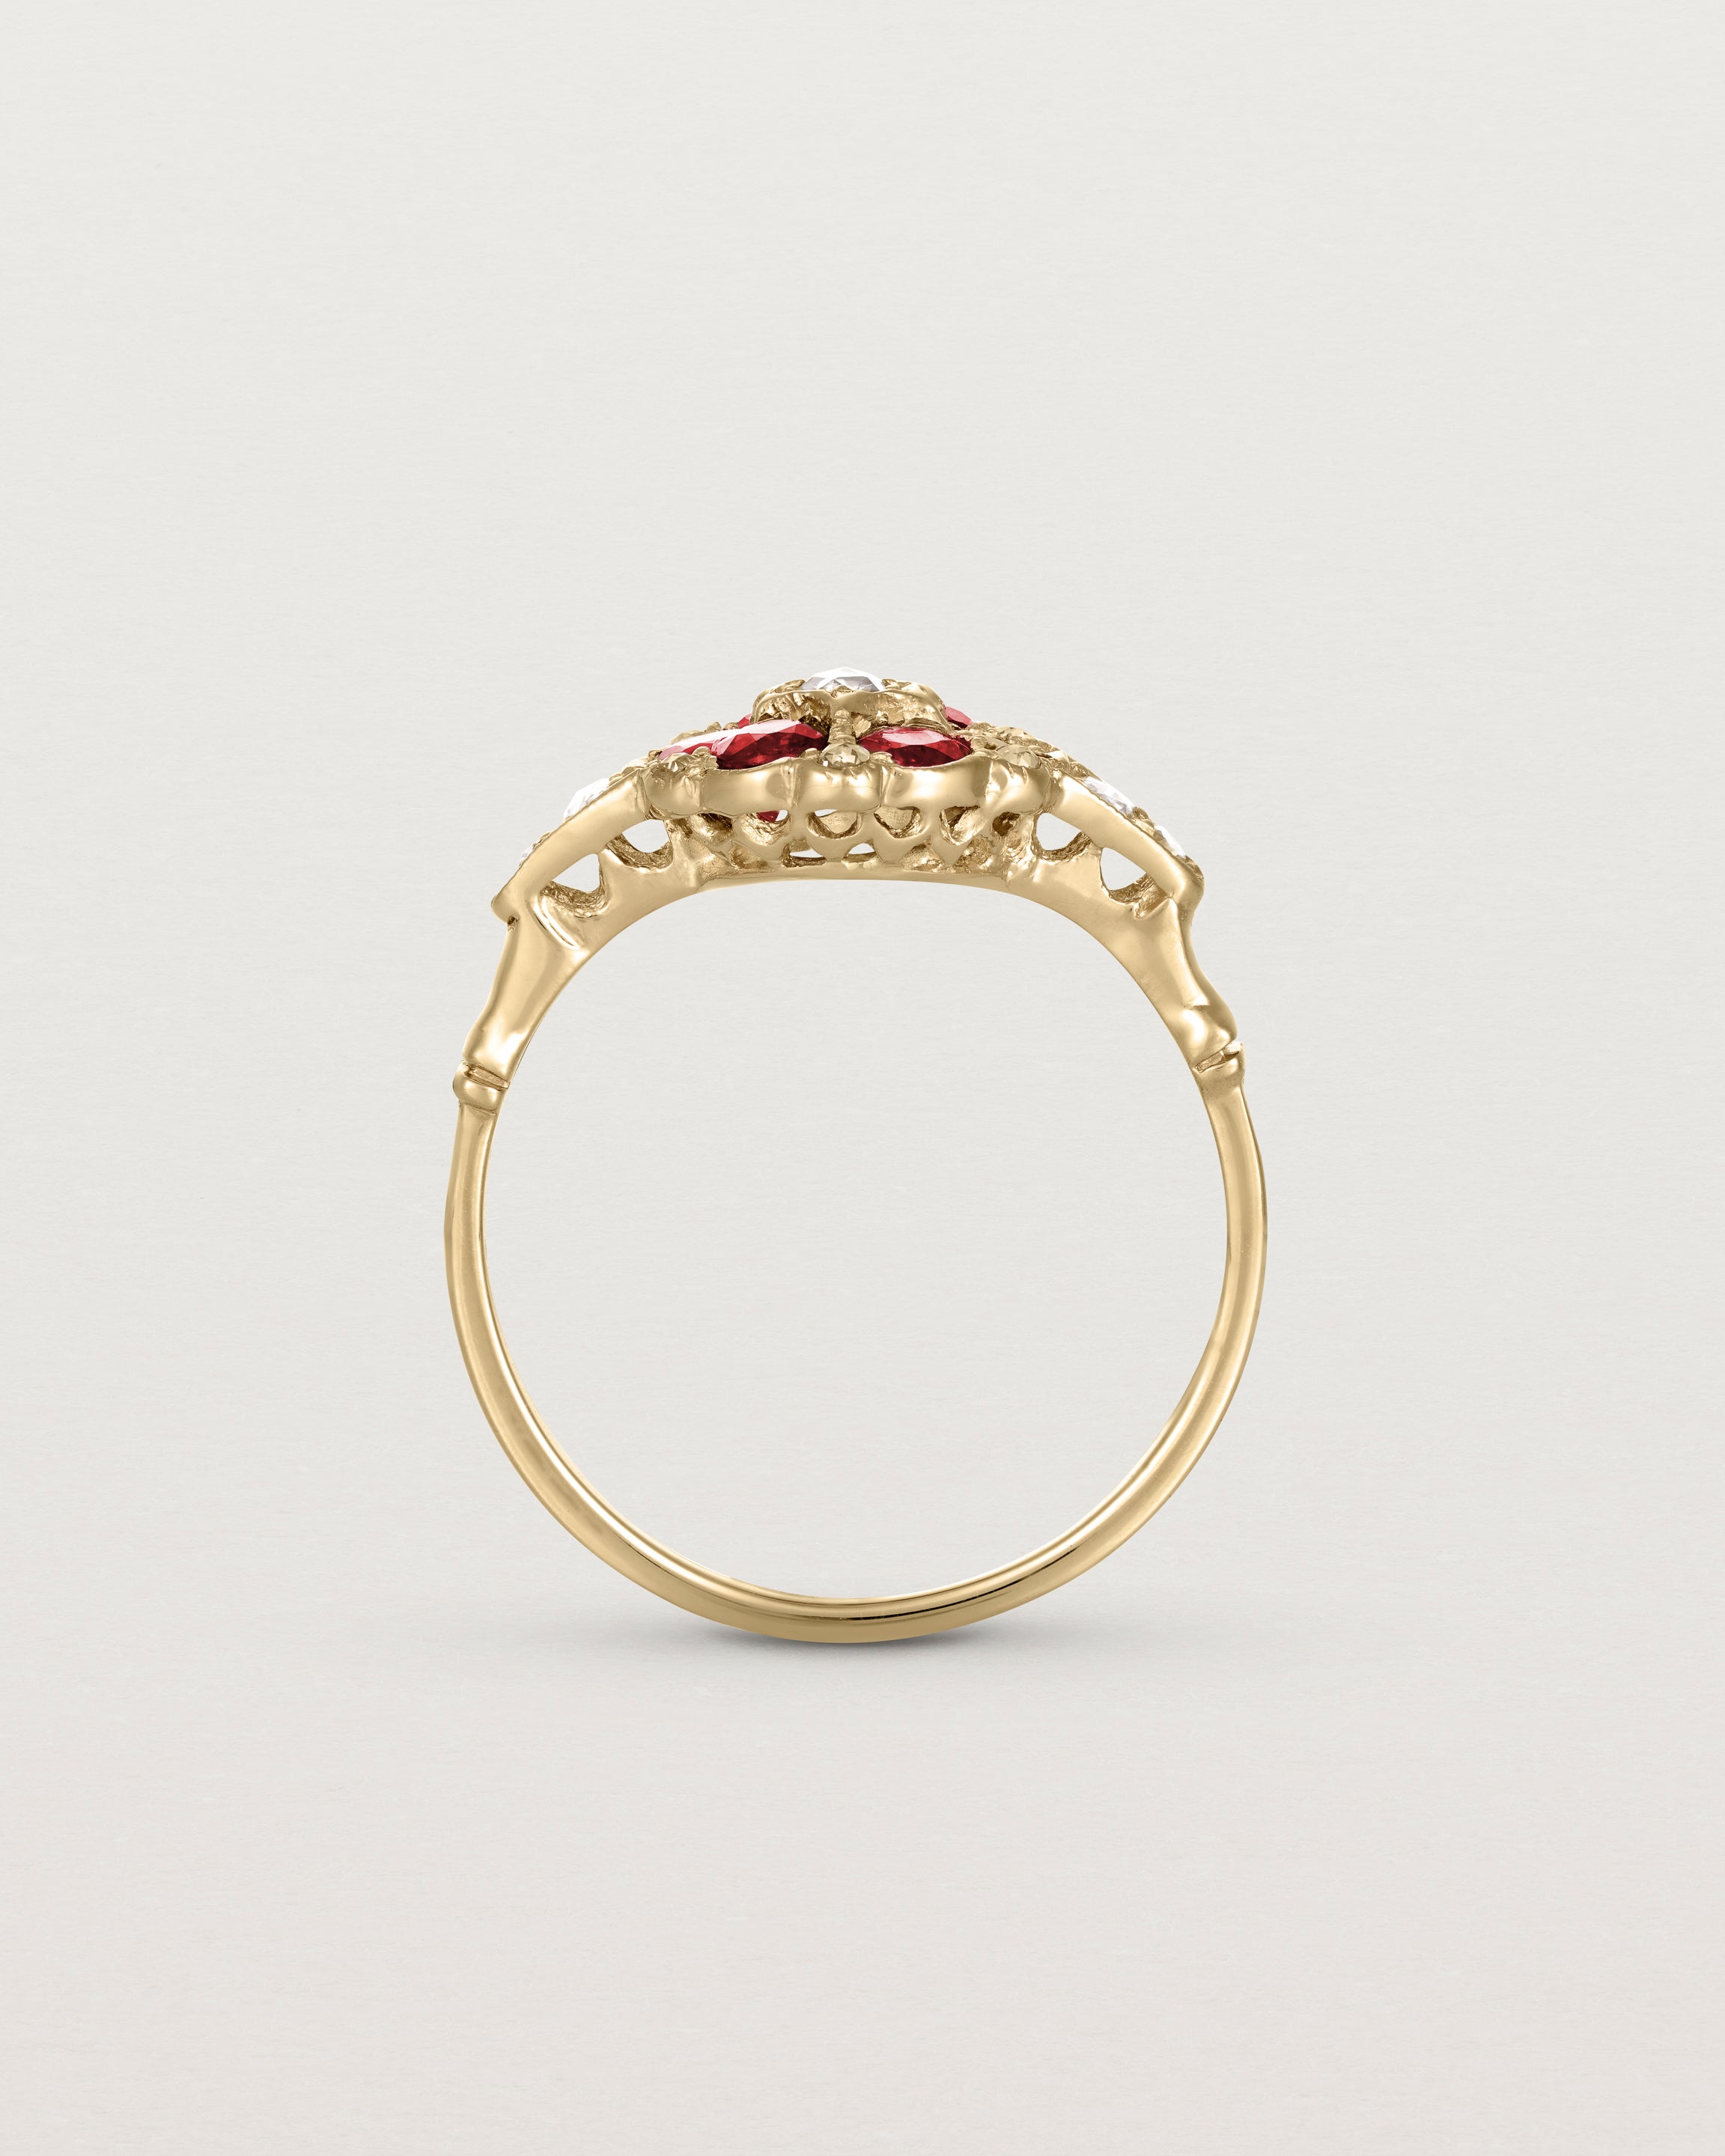 Standing view of the Polly Vintage Ring | Ruby & Diamonds.